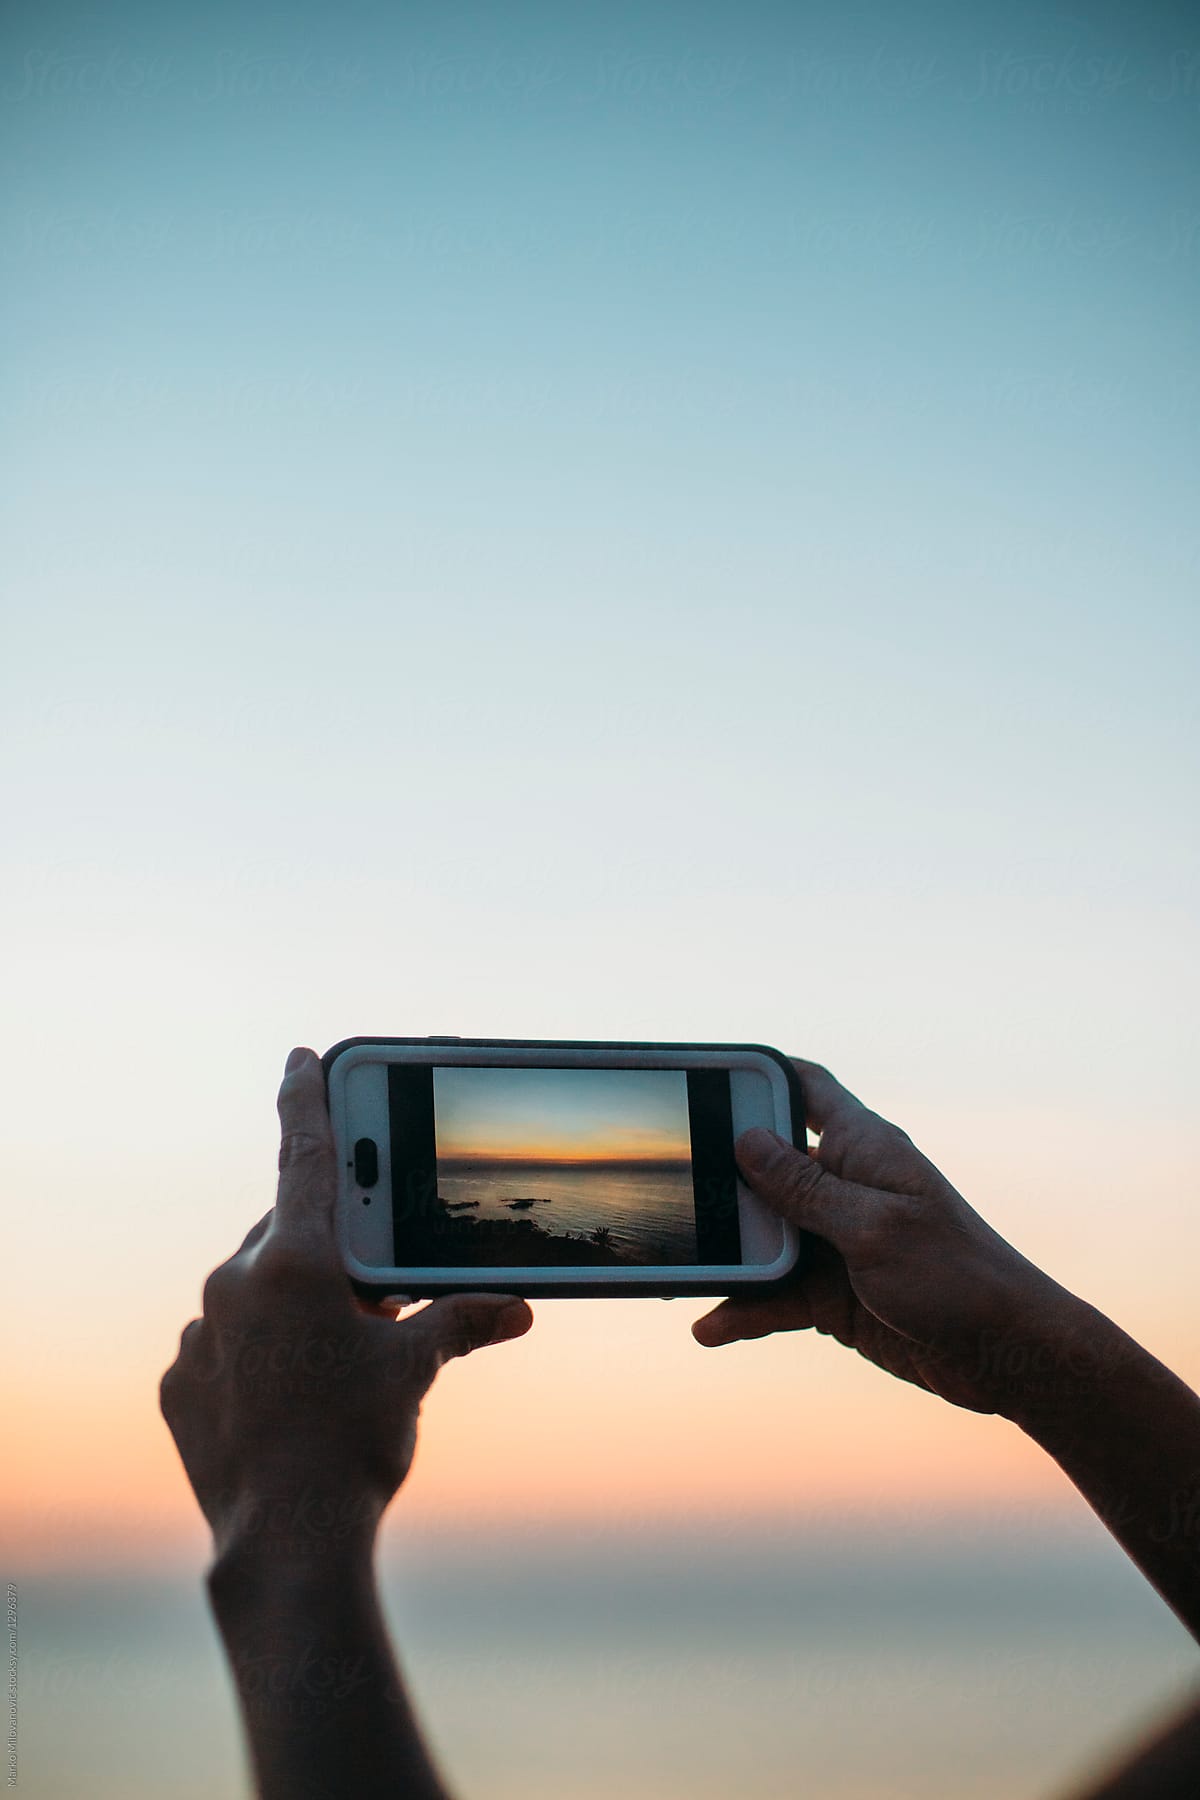 Woman taking pictures with phone at sea sunset